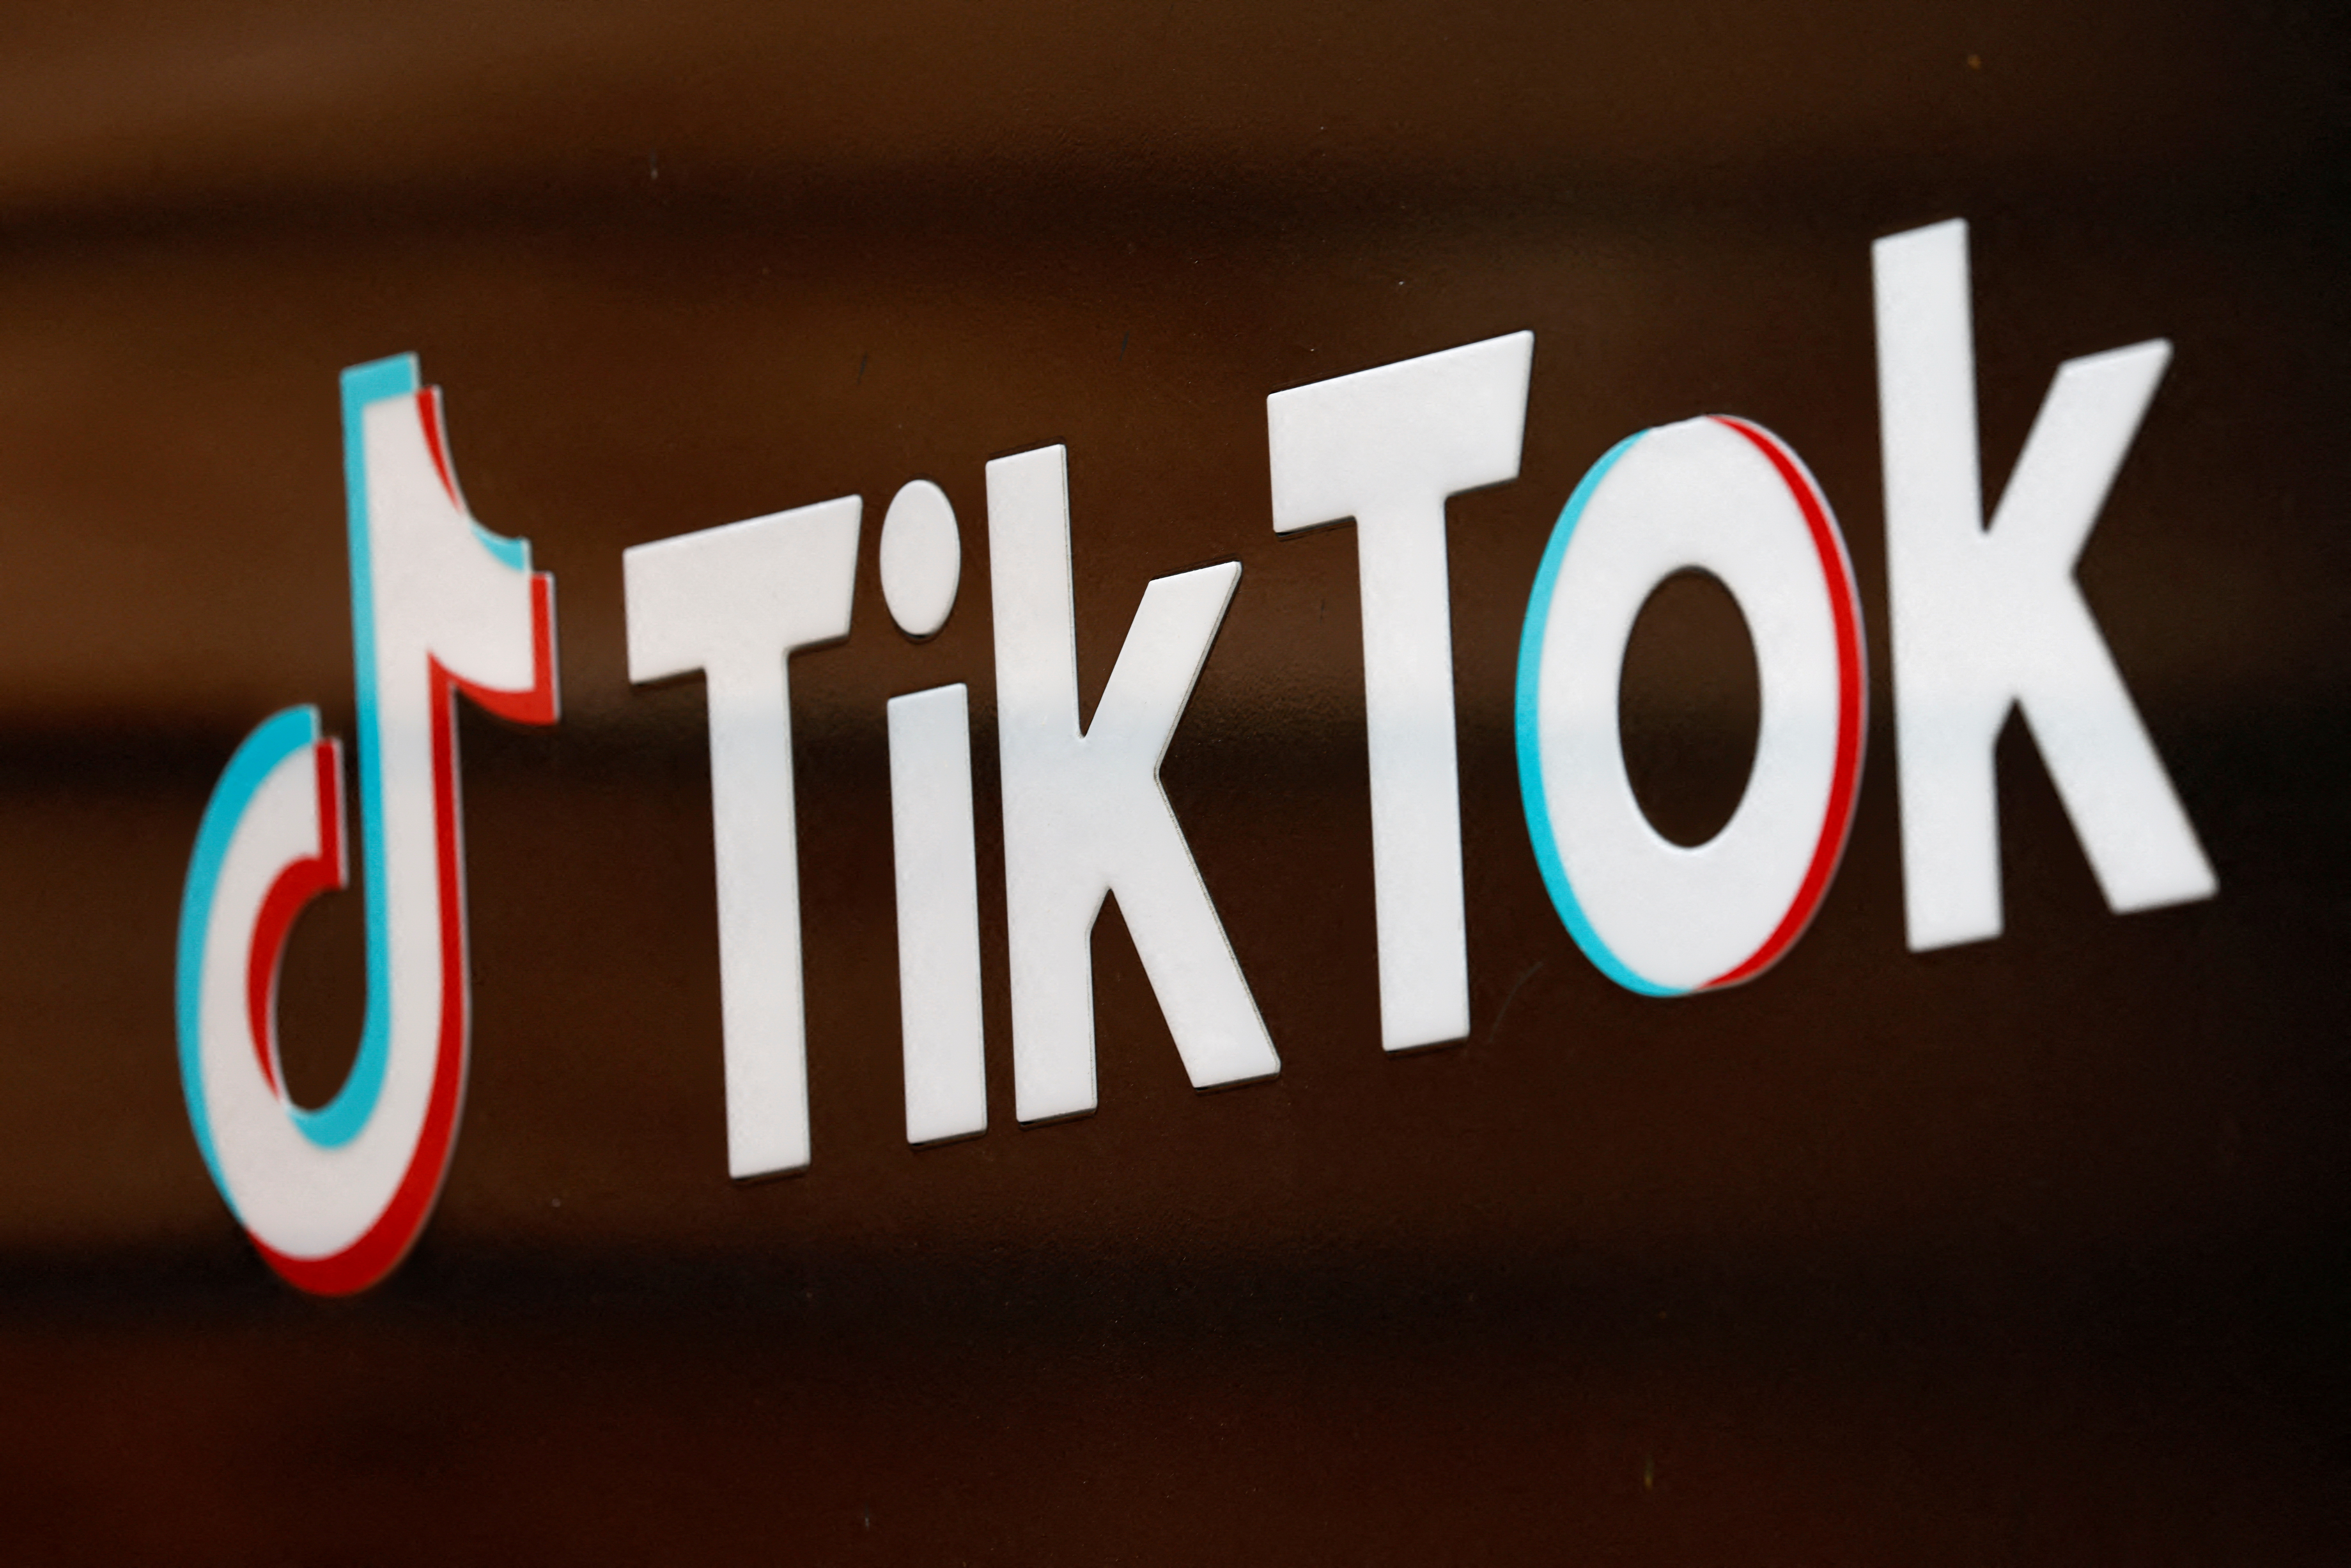 TikTok claimed that 93% of the human trafficking content on the platform was removed proactively.?